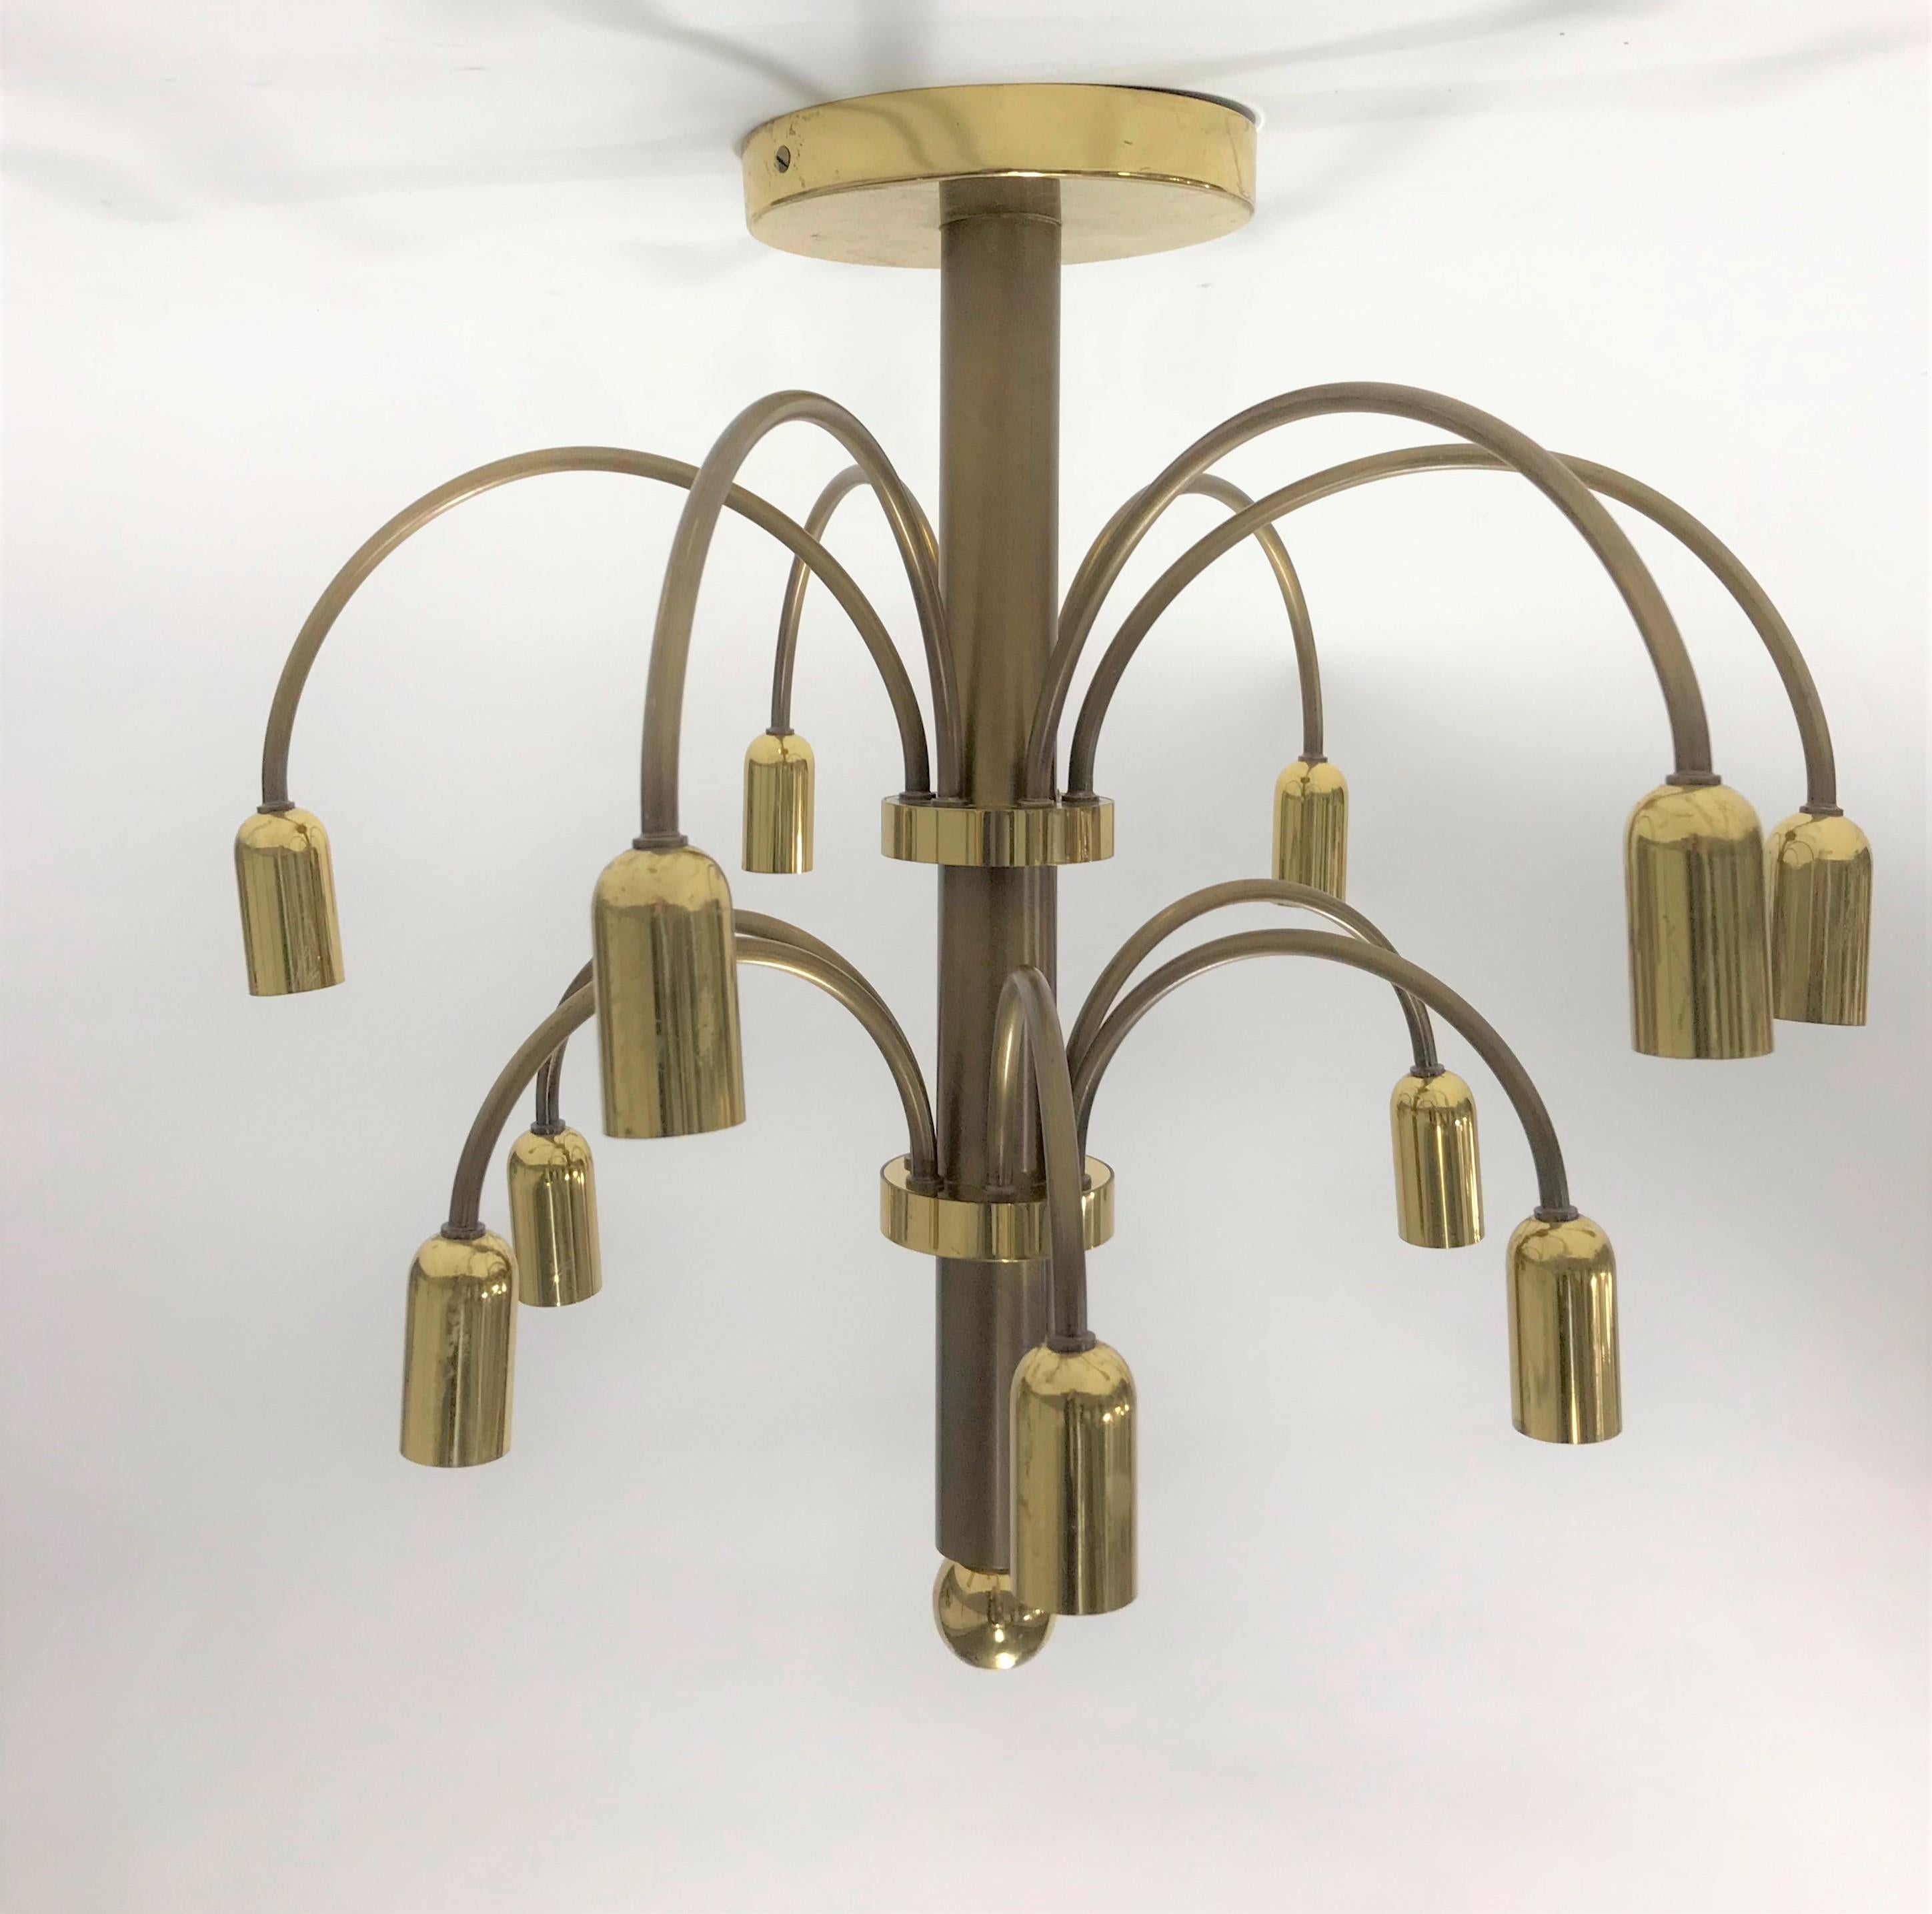 Vintage flush mount 12 lightpoint chandelier by Gaetano Sciolari for Boulanger.

The lamp can also be used as a table lamp

Good condition, tested and ready for use with regular E14 light bulbs (chandelier will work all around the world)

We